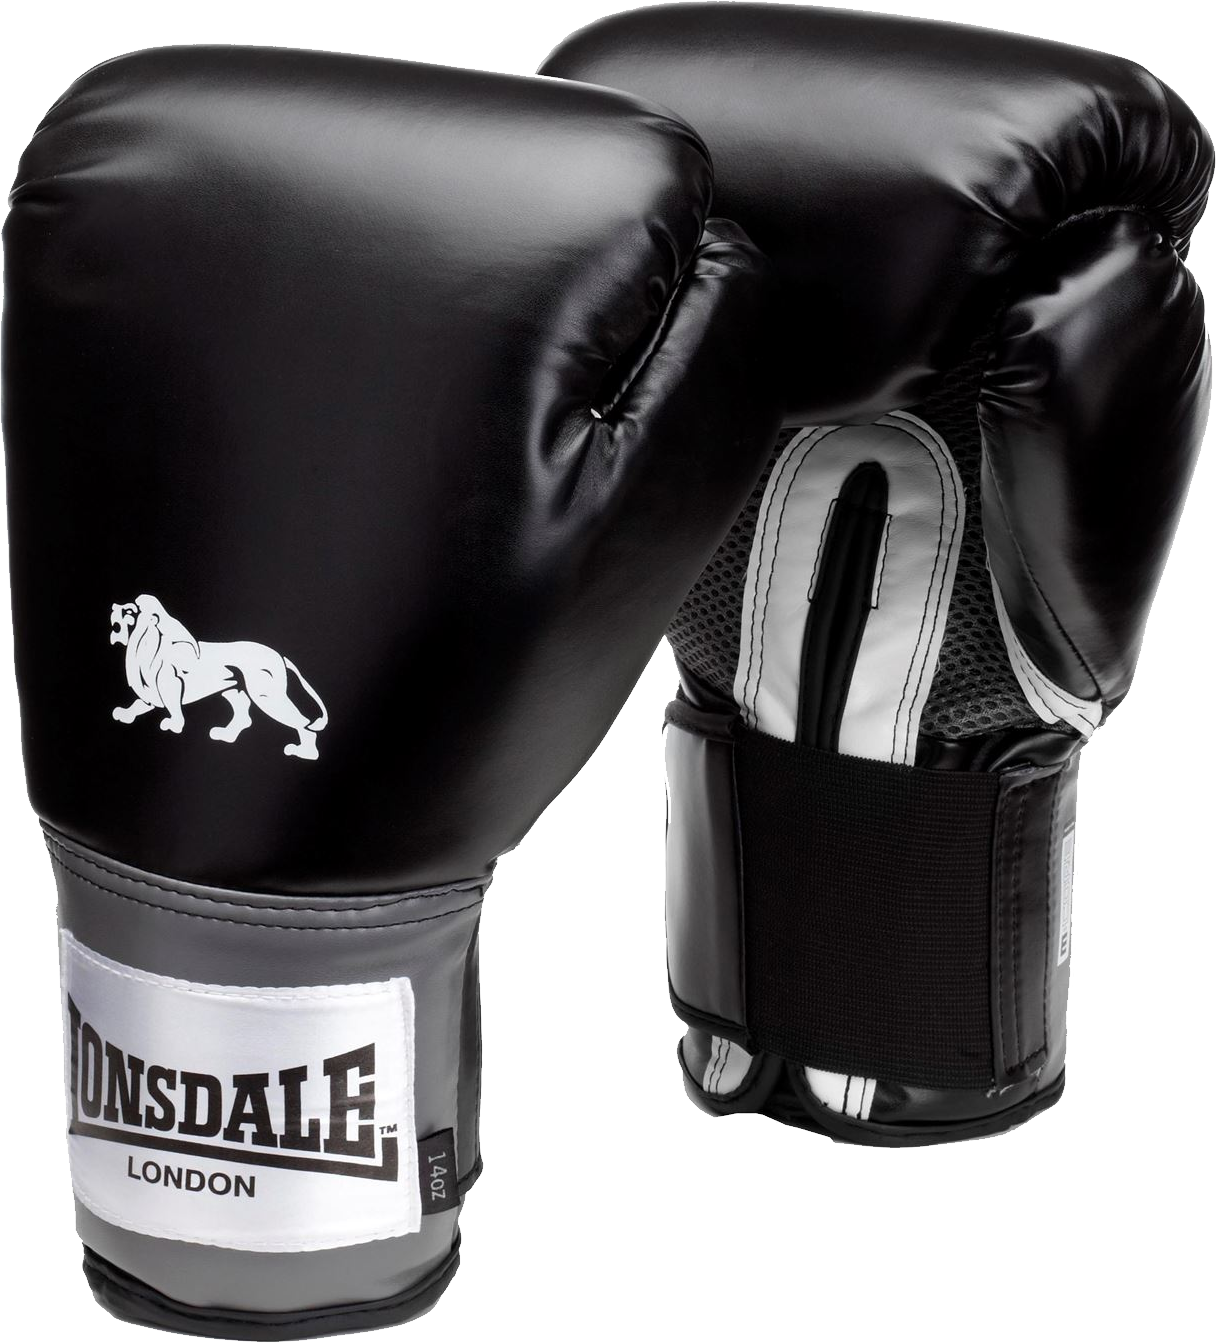 londonsale boxing gloves brand png image #29335